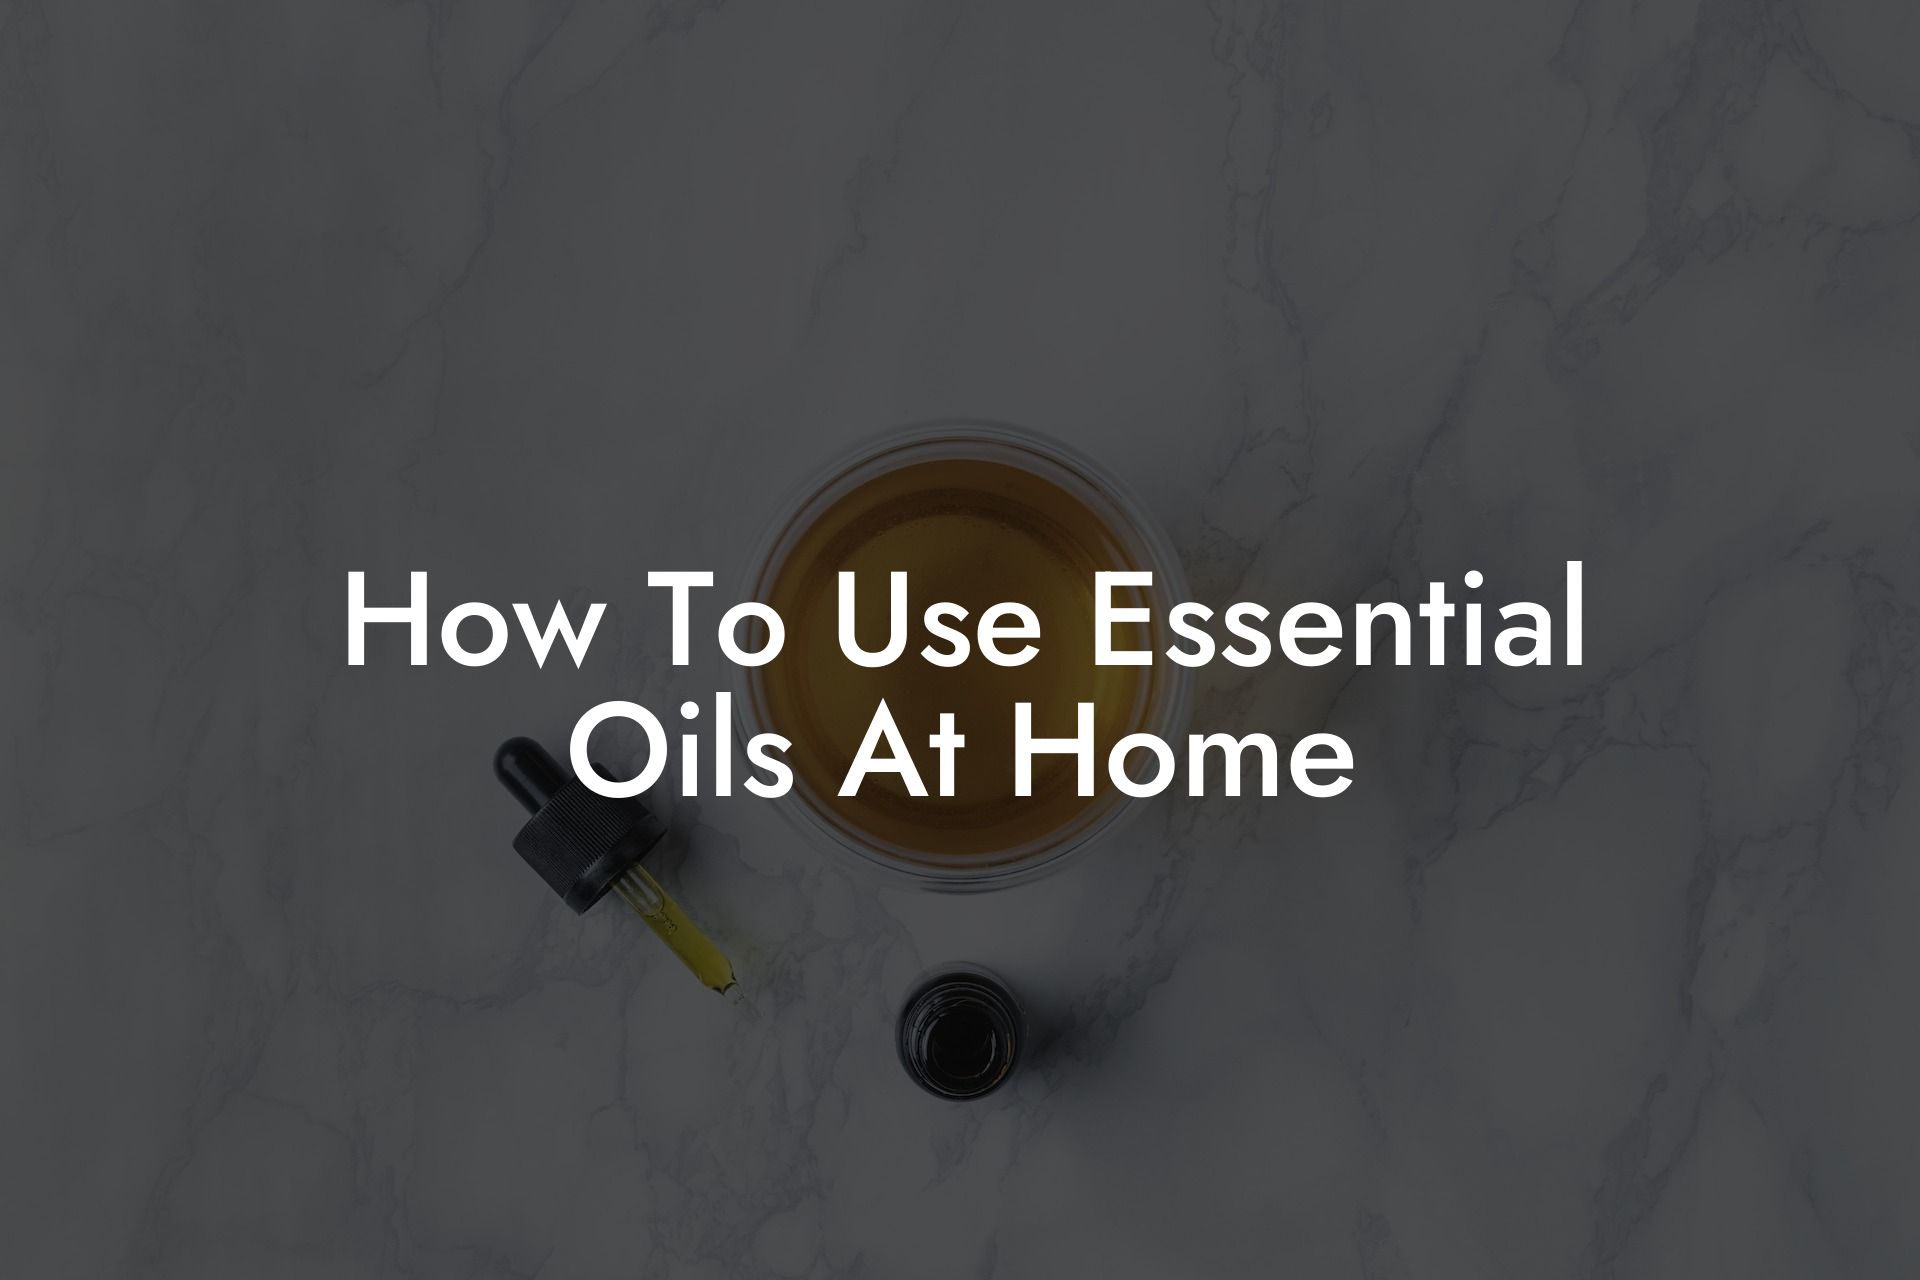 How To Use Essential Oils At Home